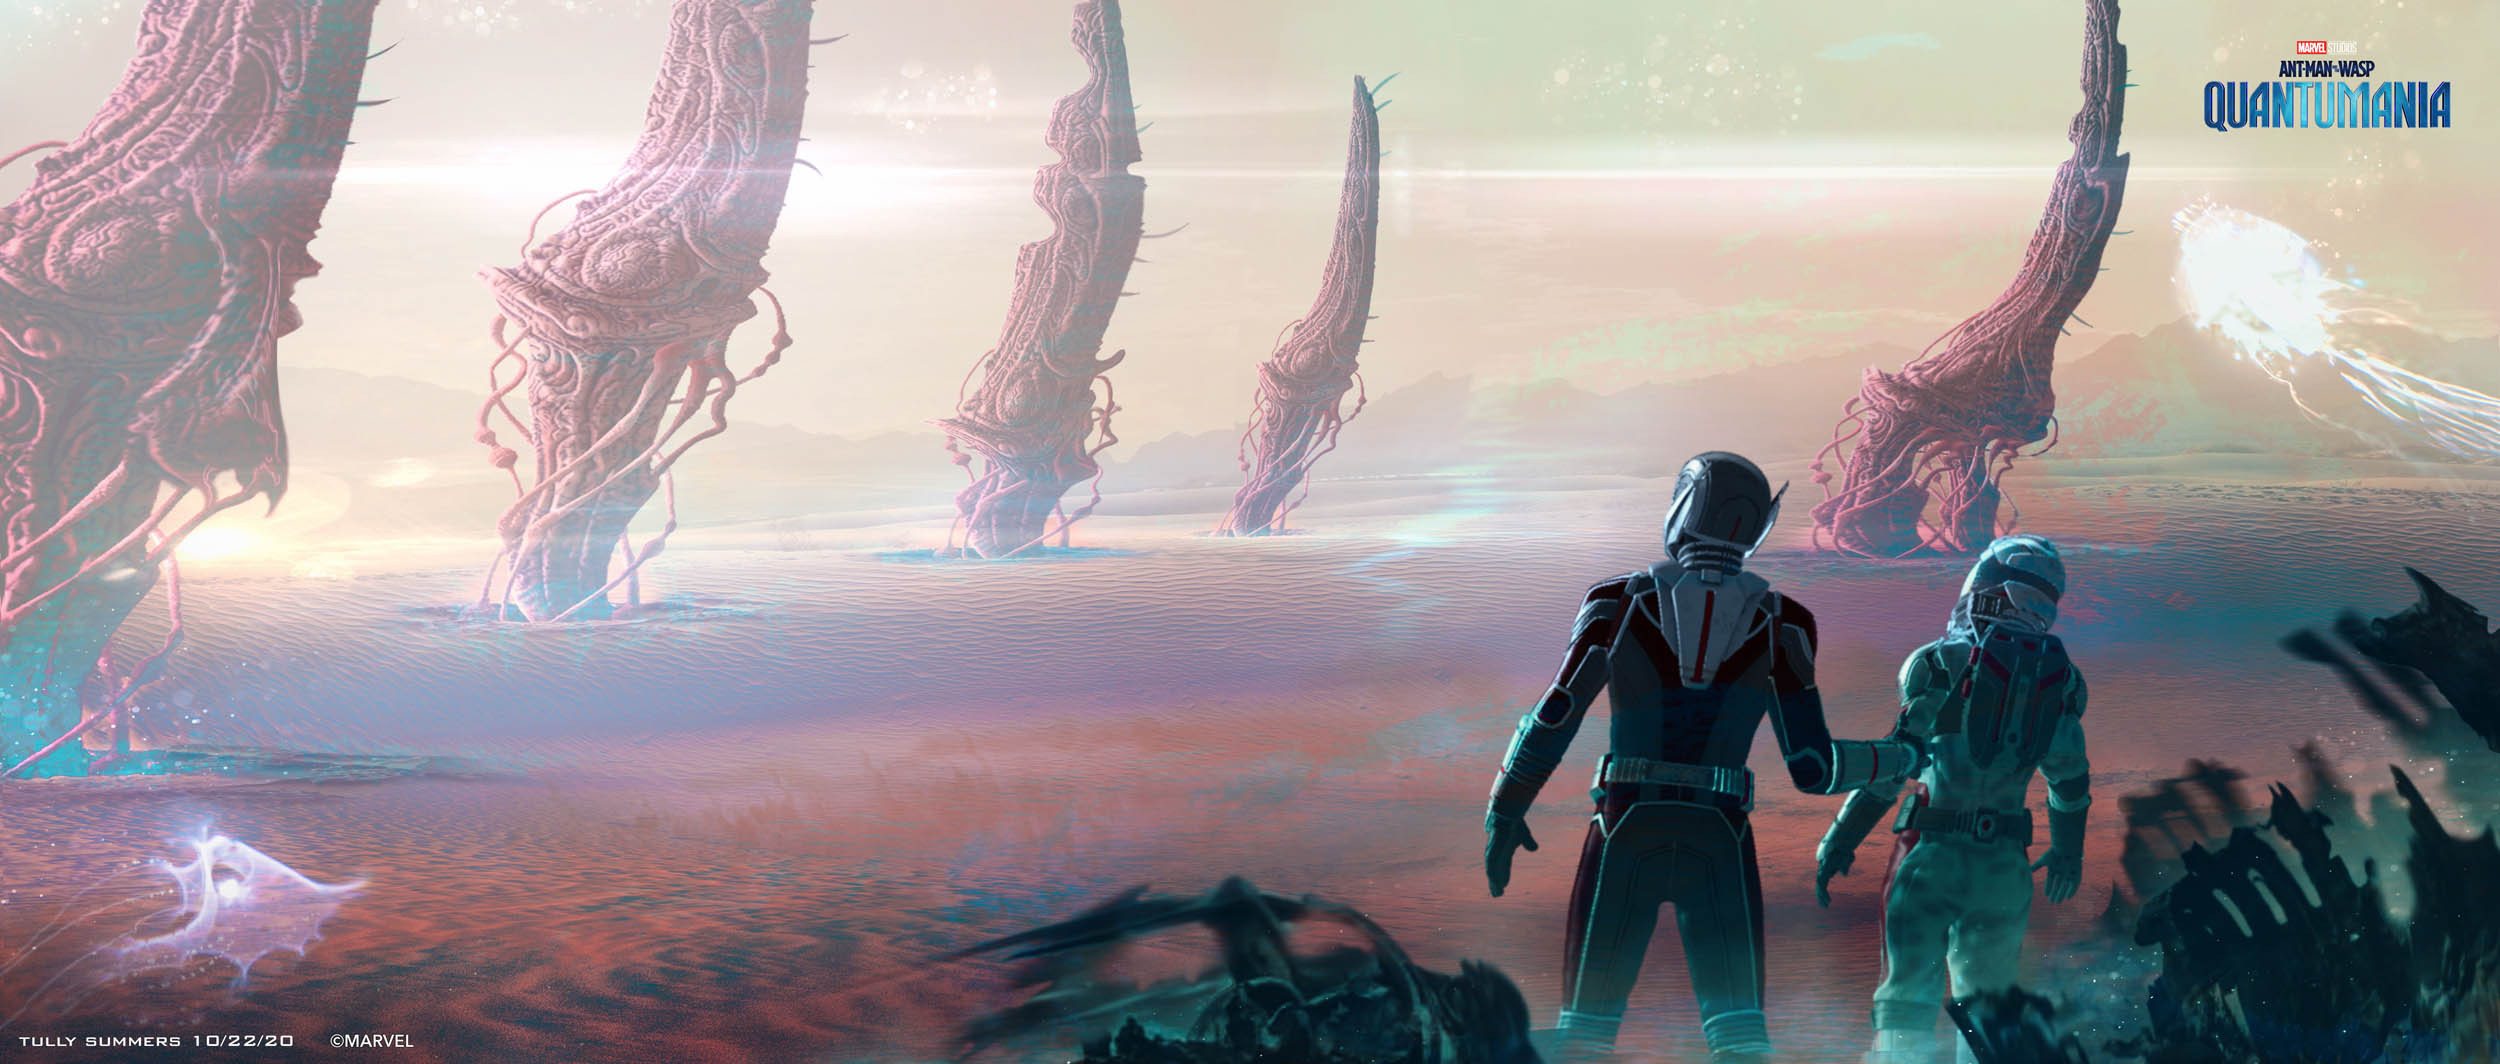 Ant-man and Cassie peer across a quantum desert, bristling with huge organic spires.